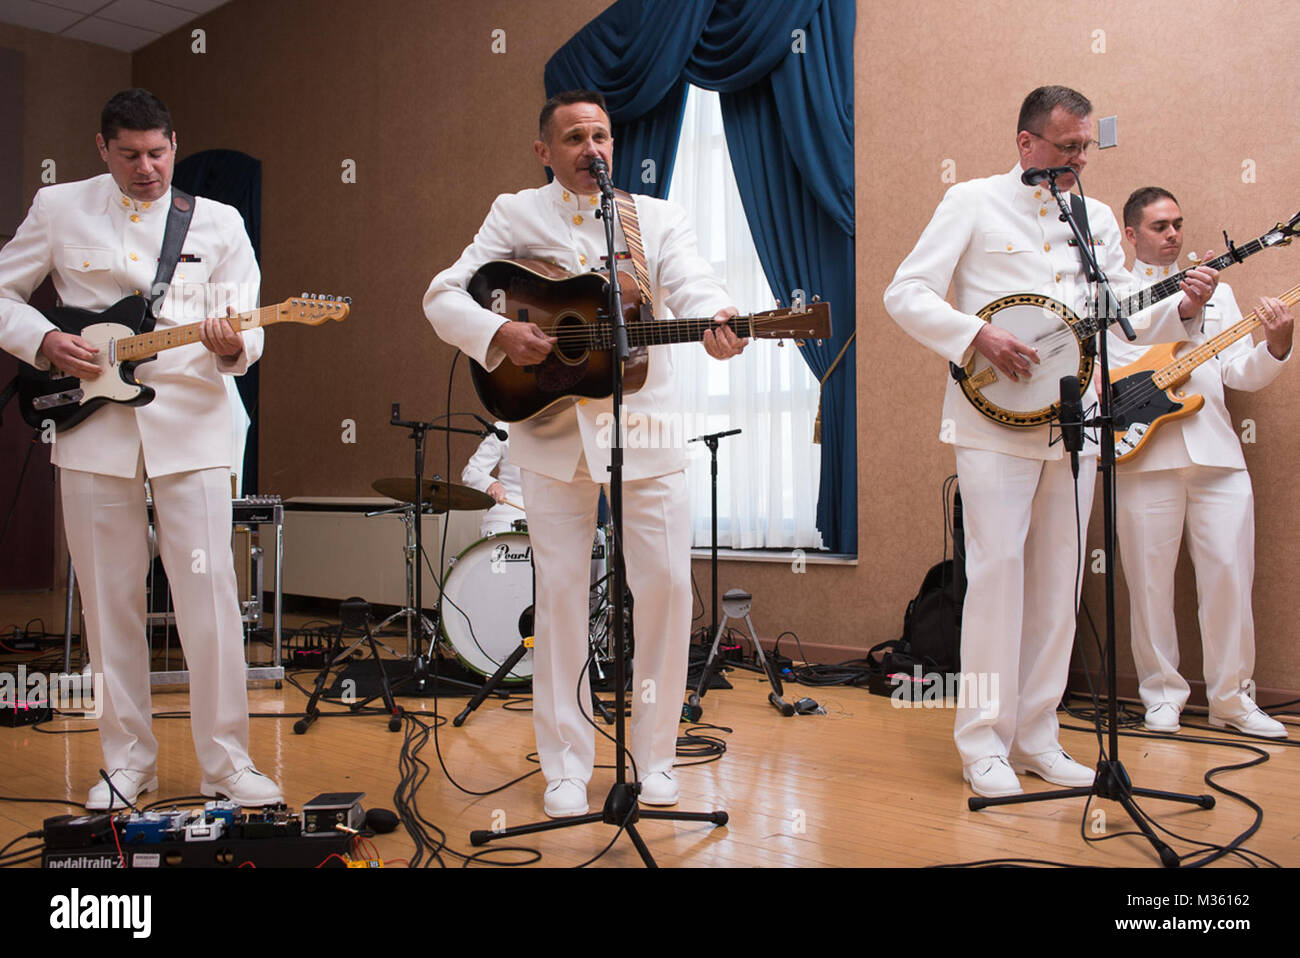 150724-N-DD694-020 WASHINGTON (July 24, 2015) The United States Navy Band Country Current performs at the retirement ceremony of Captain Brian Walden. Capt. Walden was the commanding officer of the United States Navy Band and retired after 35 years of service. (U.S. Navy photo by Musician 1st Class Jonathan Barnes/Released) 150724-N-DD694-020 by United States Navy Band Stock Photo